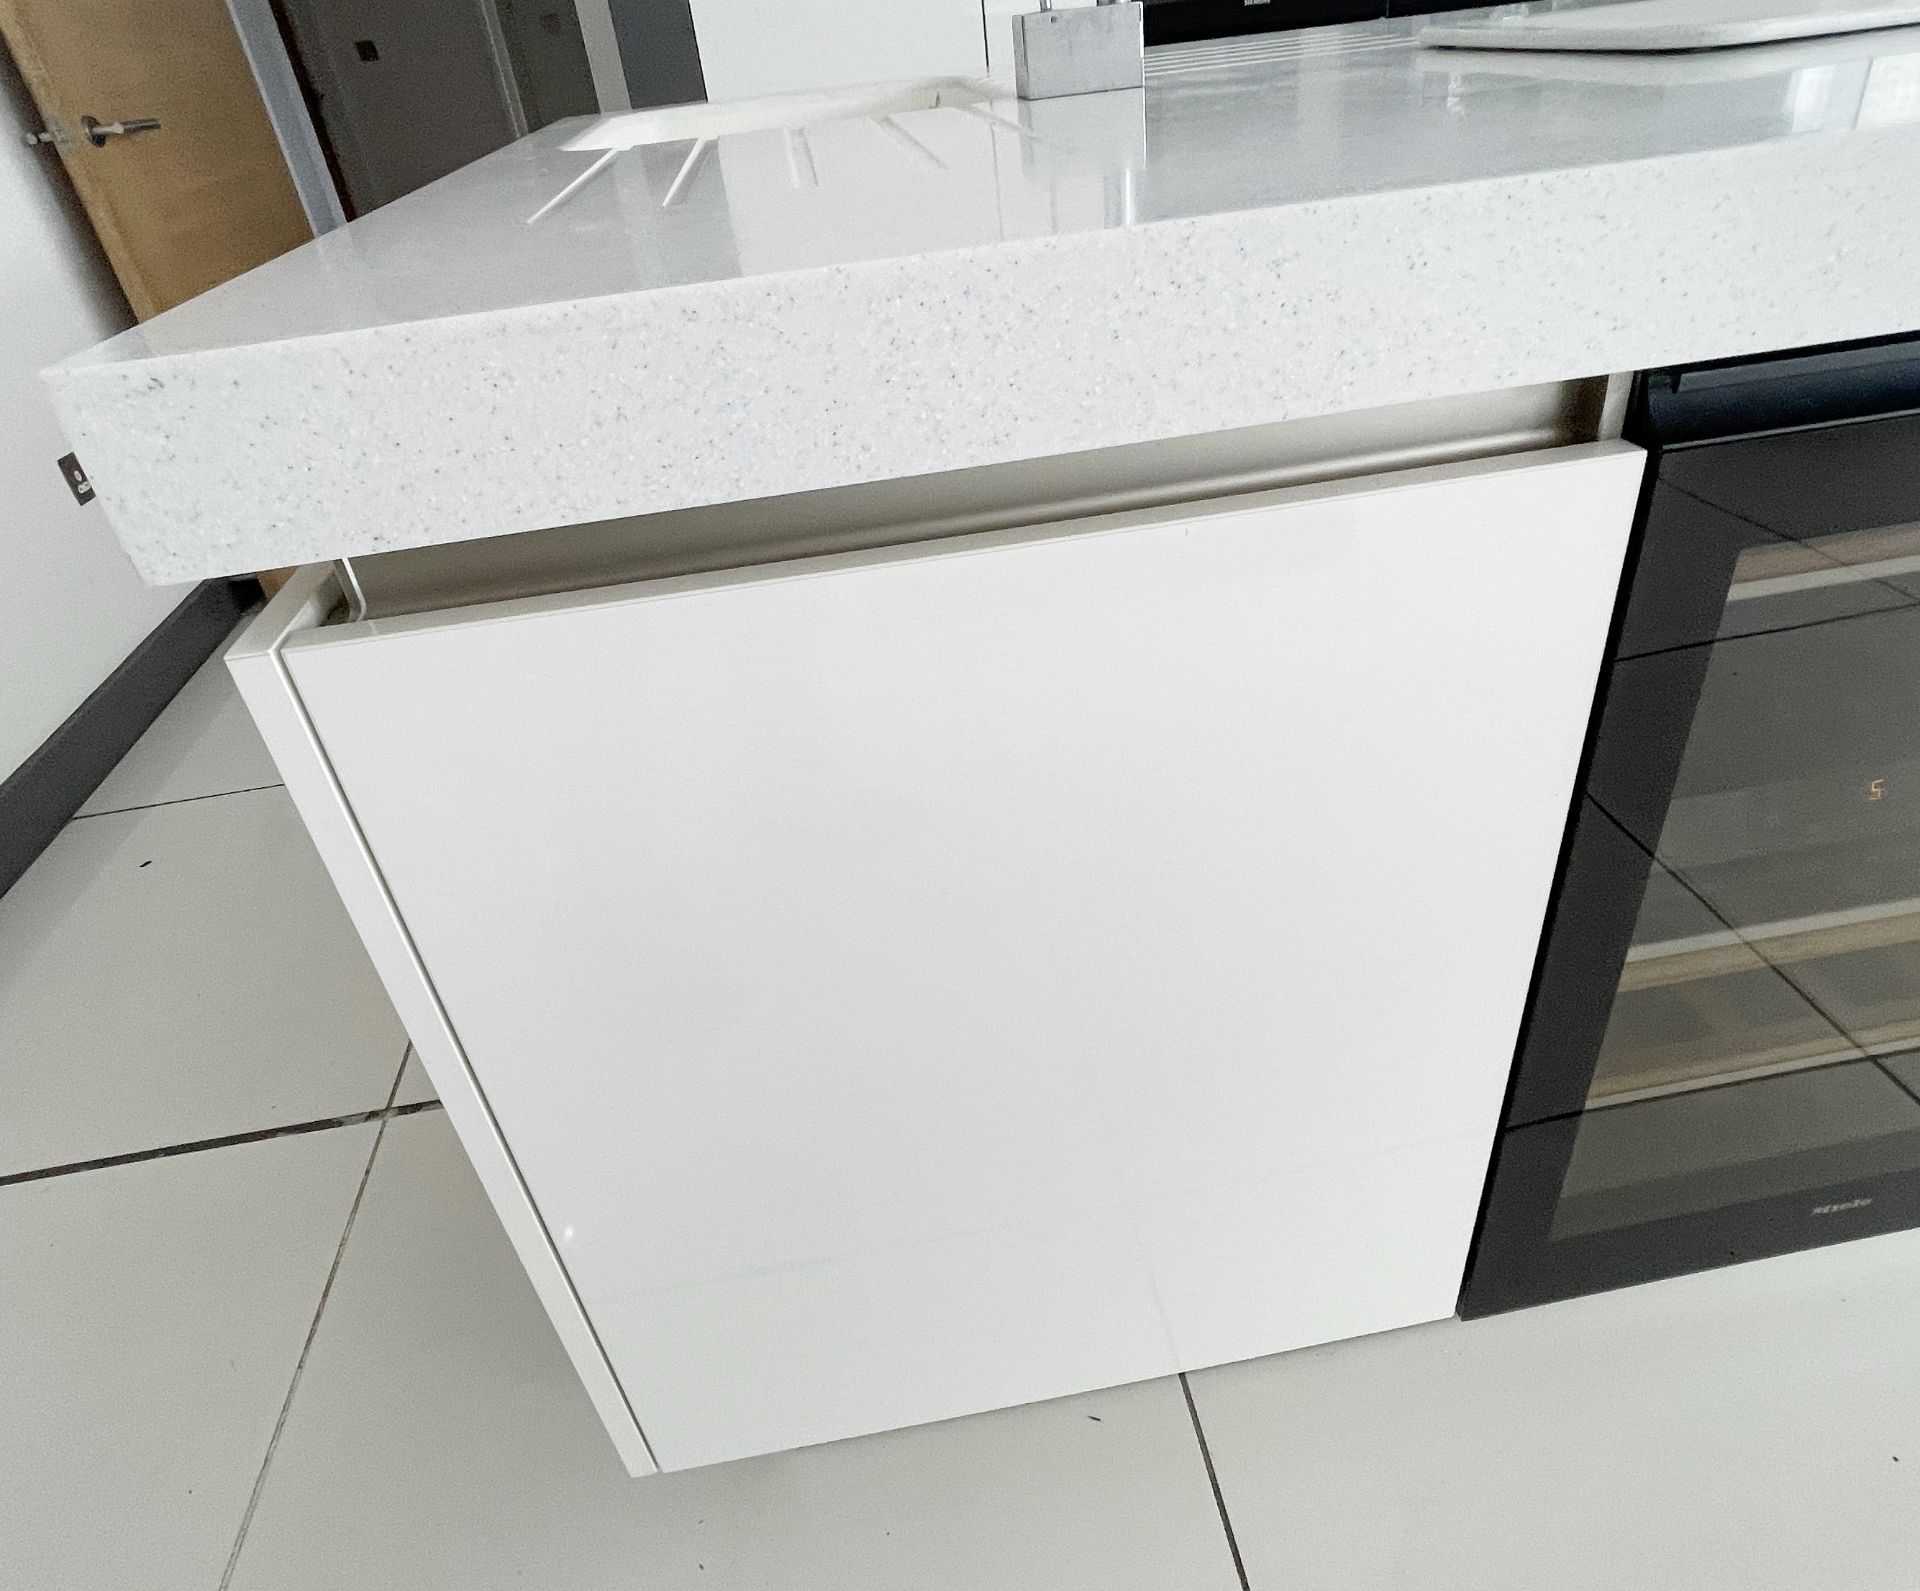 1 x SieMatic Contemporary Fitted Kitchen With Branded Appliances, Central Island + Corian Worktops - Image 28 of 100